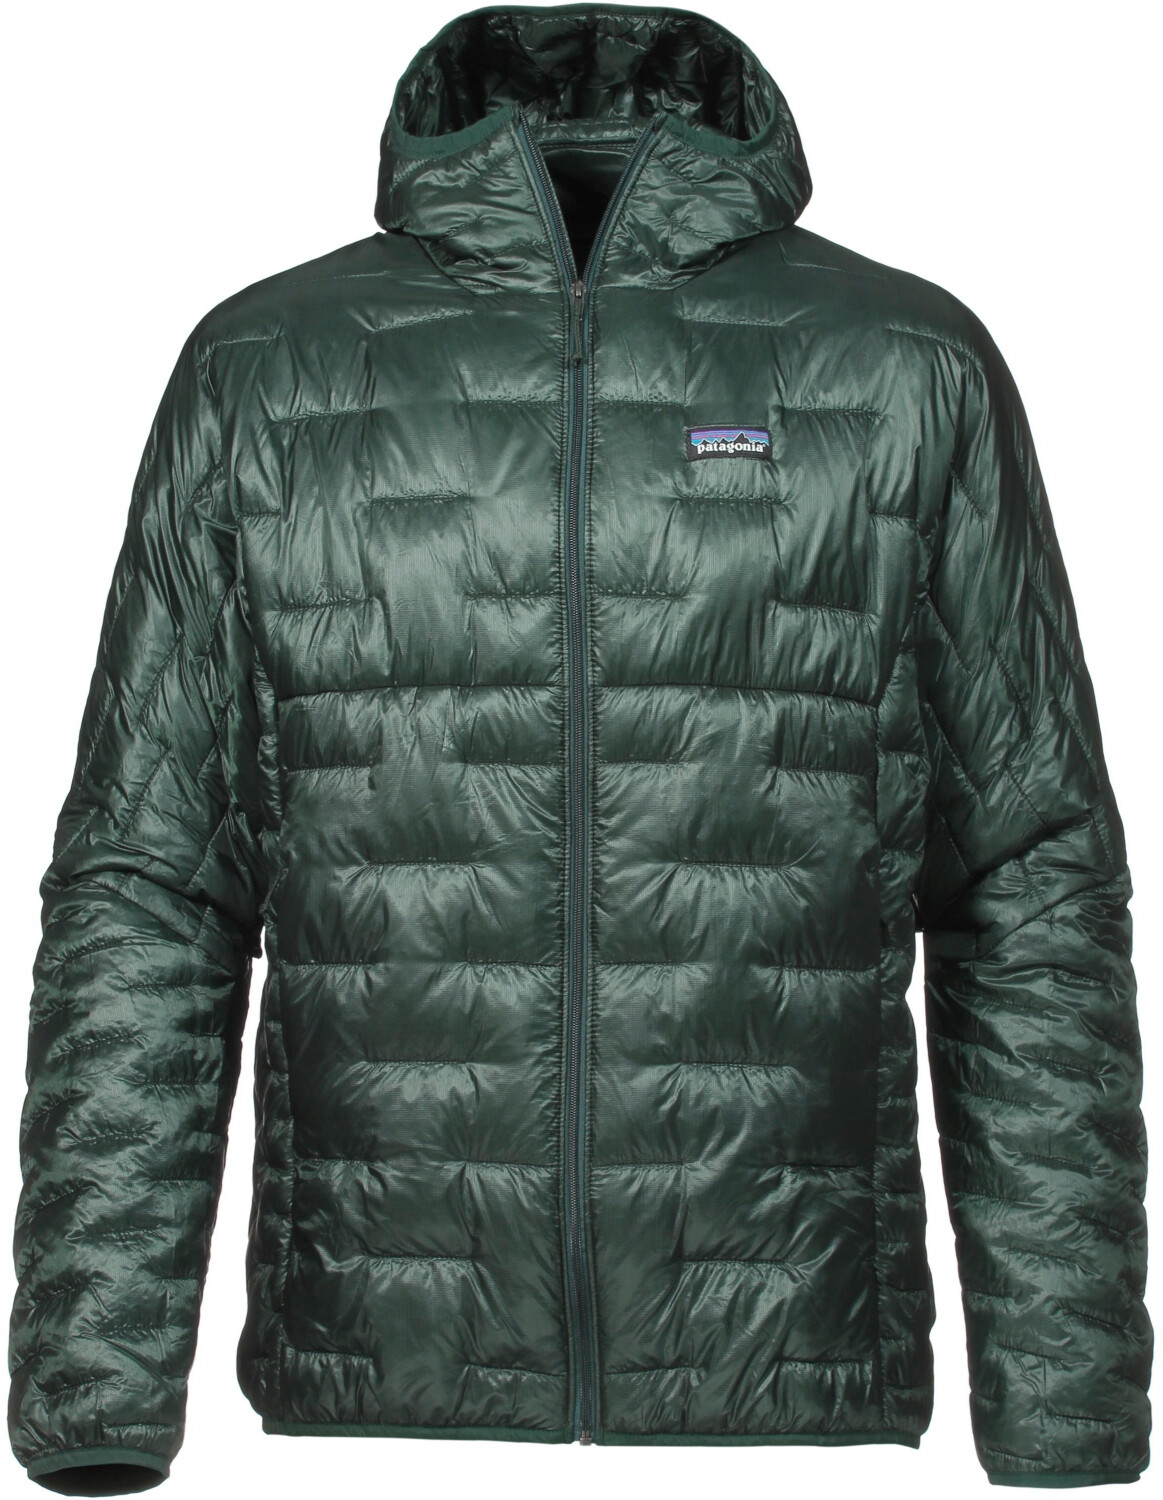 Buy Patagonia Men's Micro Puff Hoody from £209.23 (Today) – Best